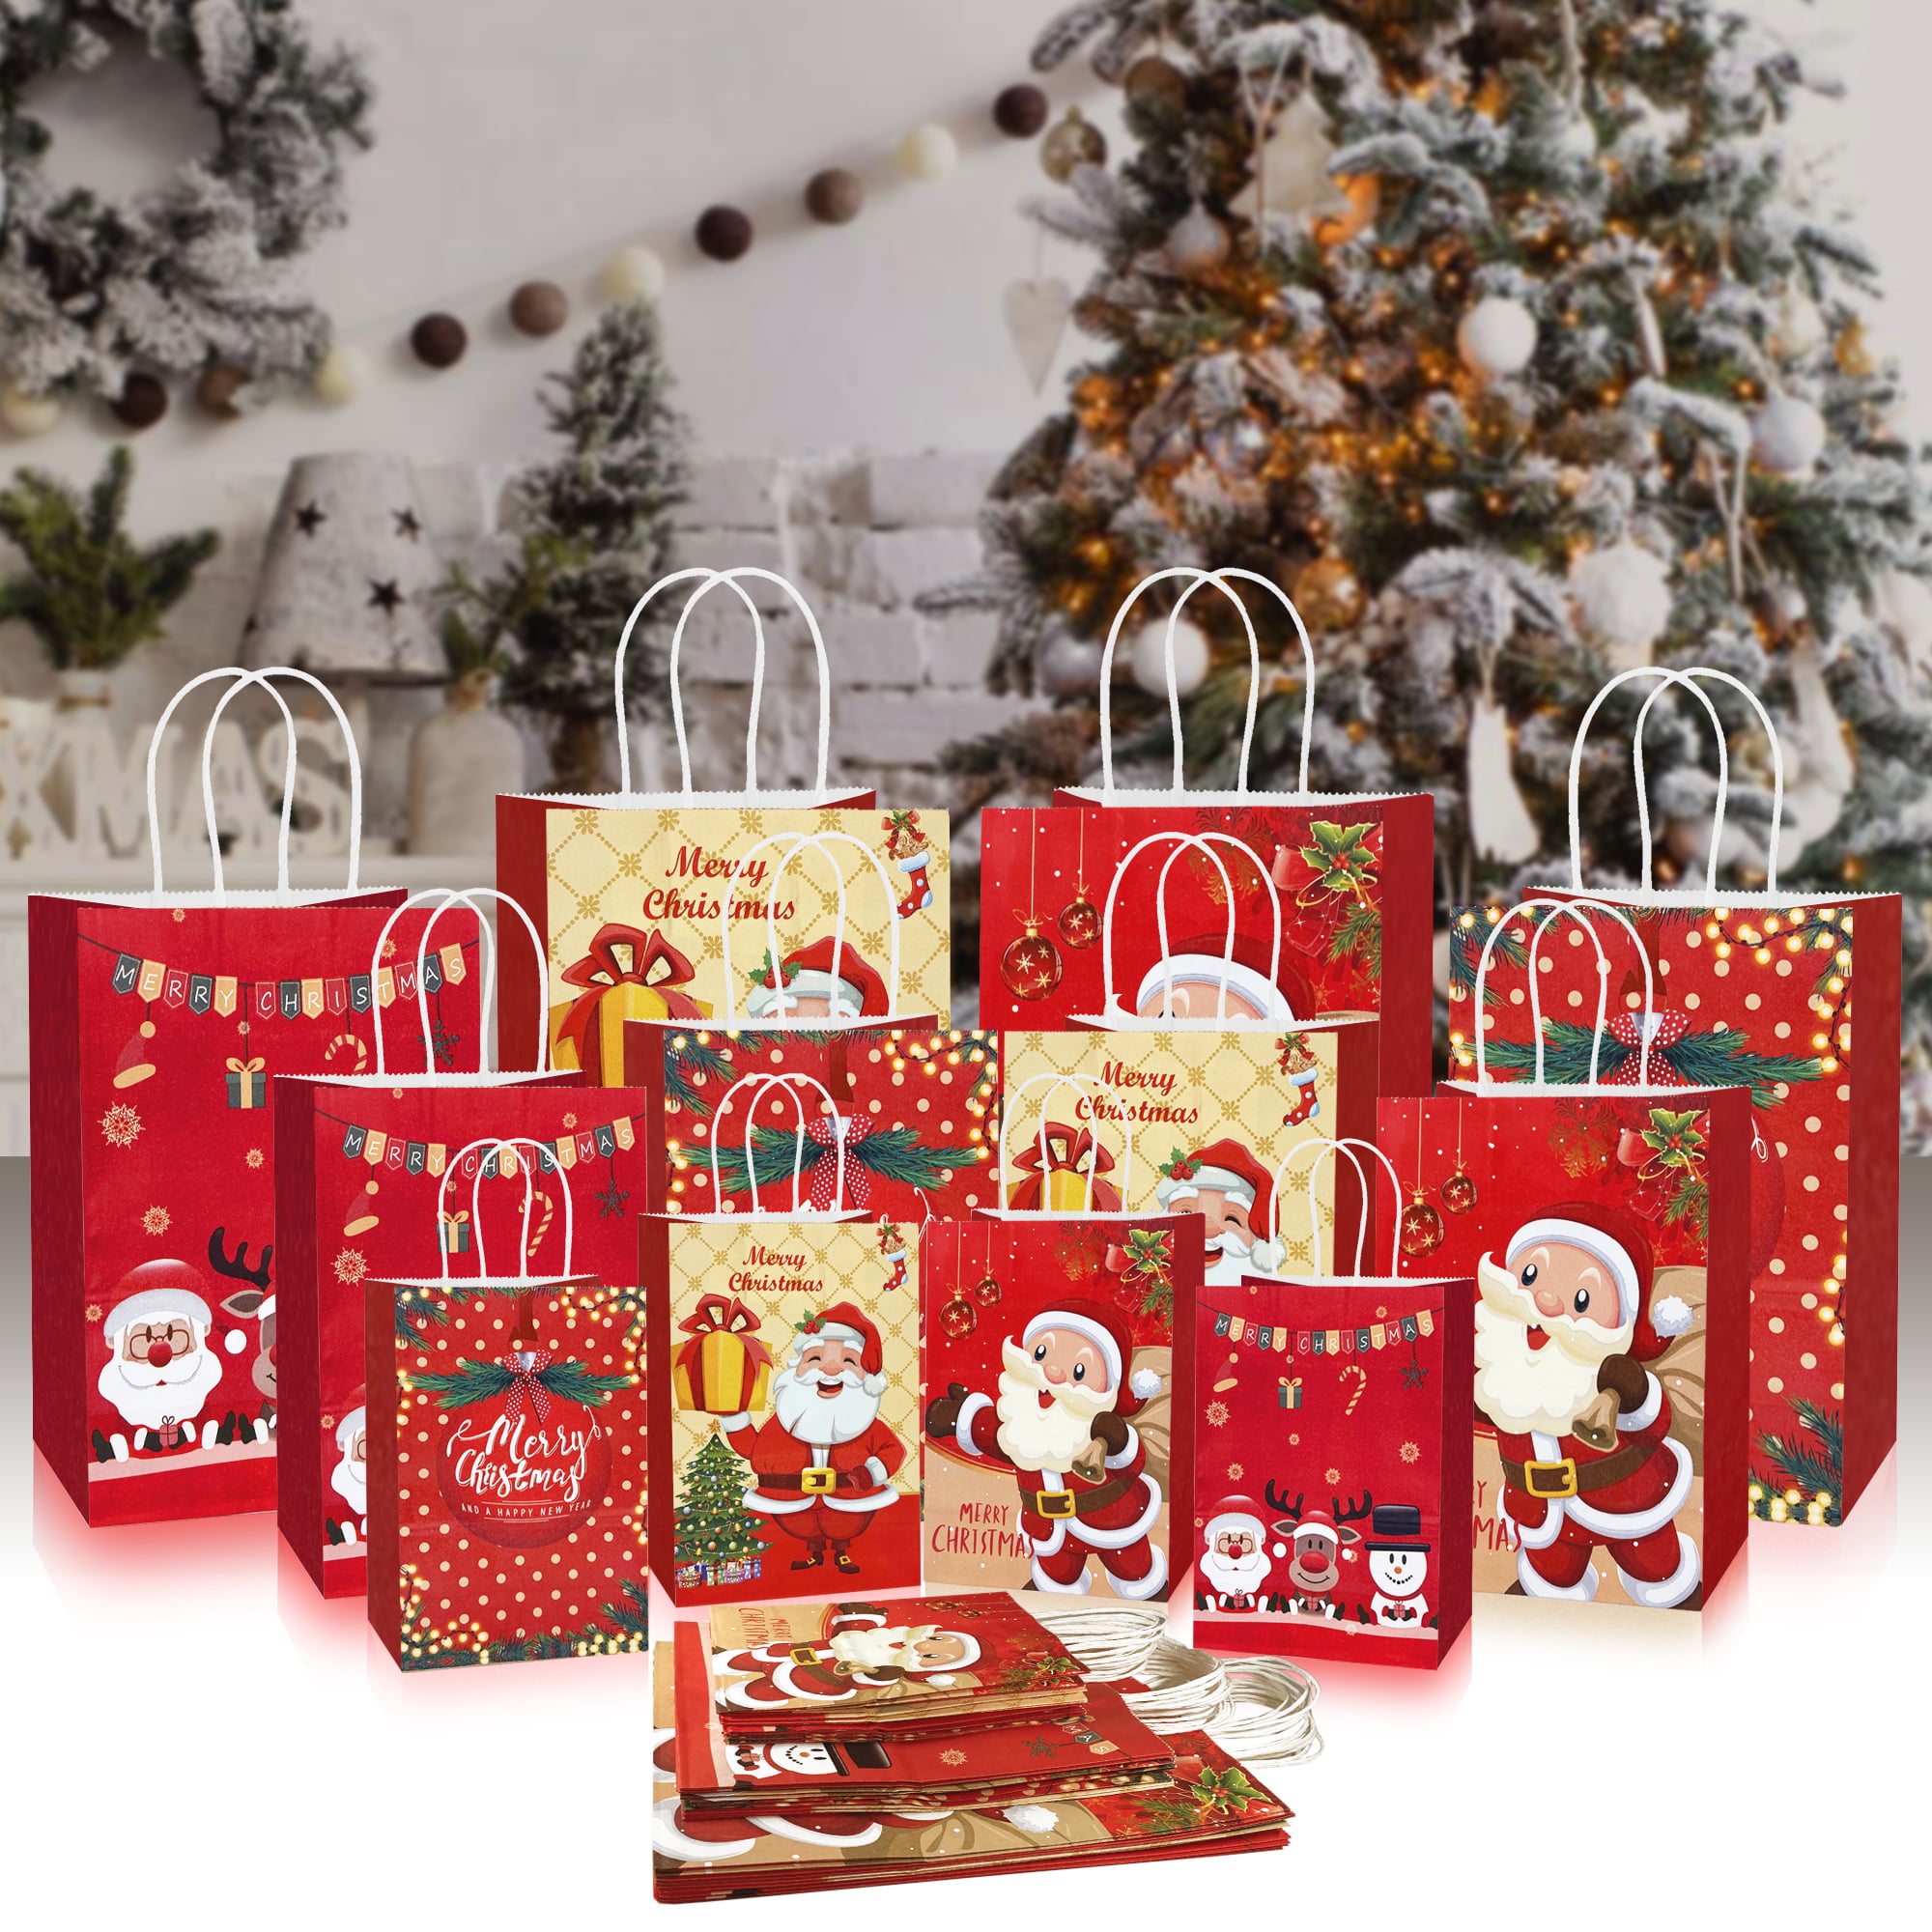 4 x Medium Christmas Gift Bags Wrapping Present Party Bag Xmas Bags Holographic 